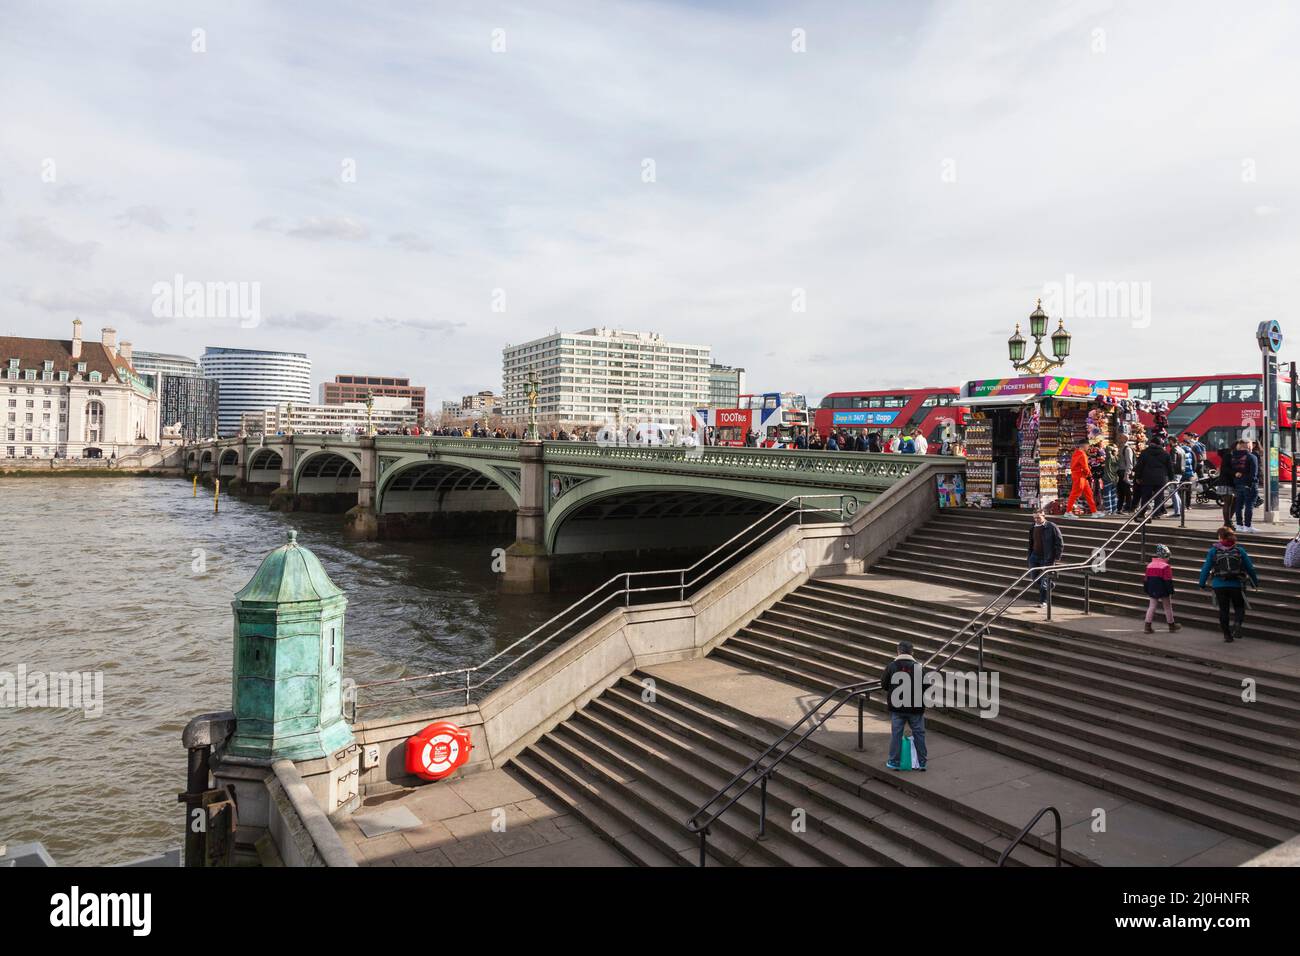 A view of Westminster Bridge,London,England,UK showing red buses,tourists and souvenir stalls. River Thames Stock Photo